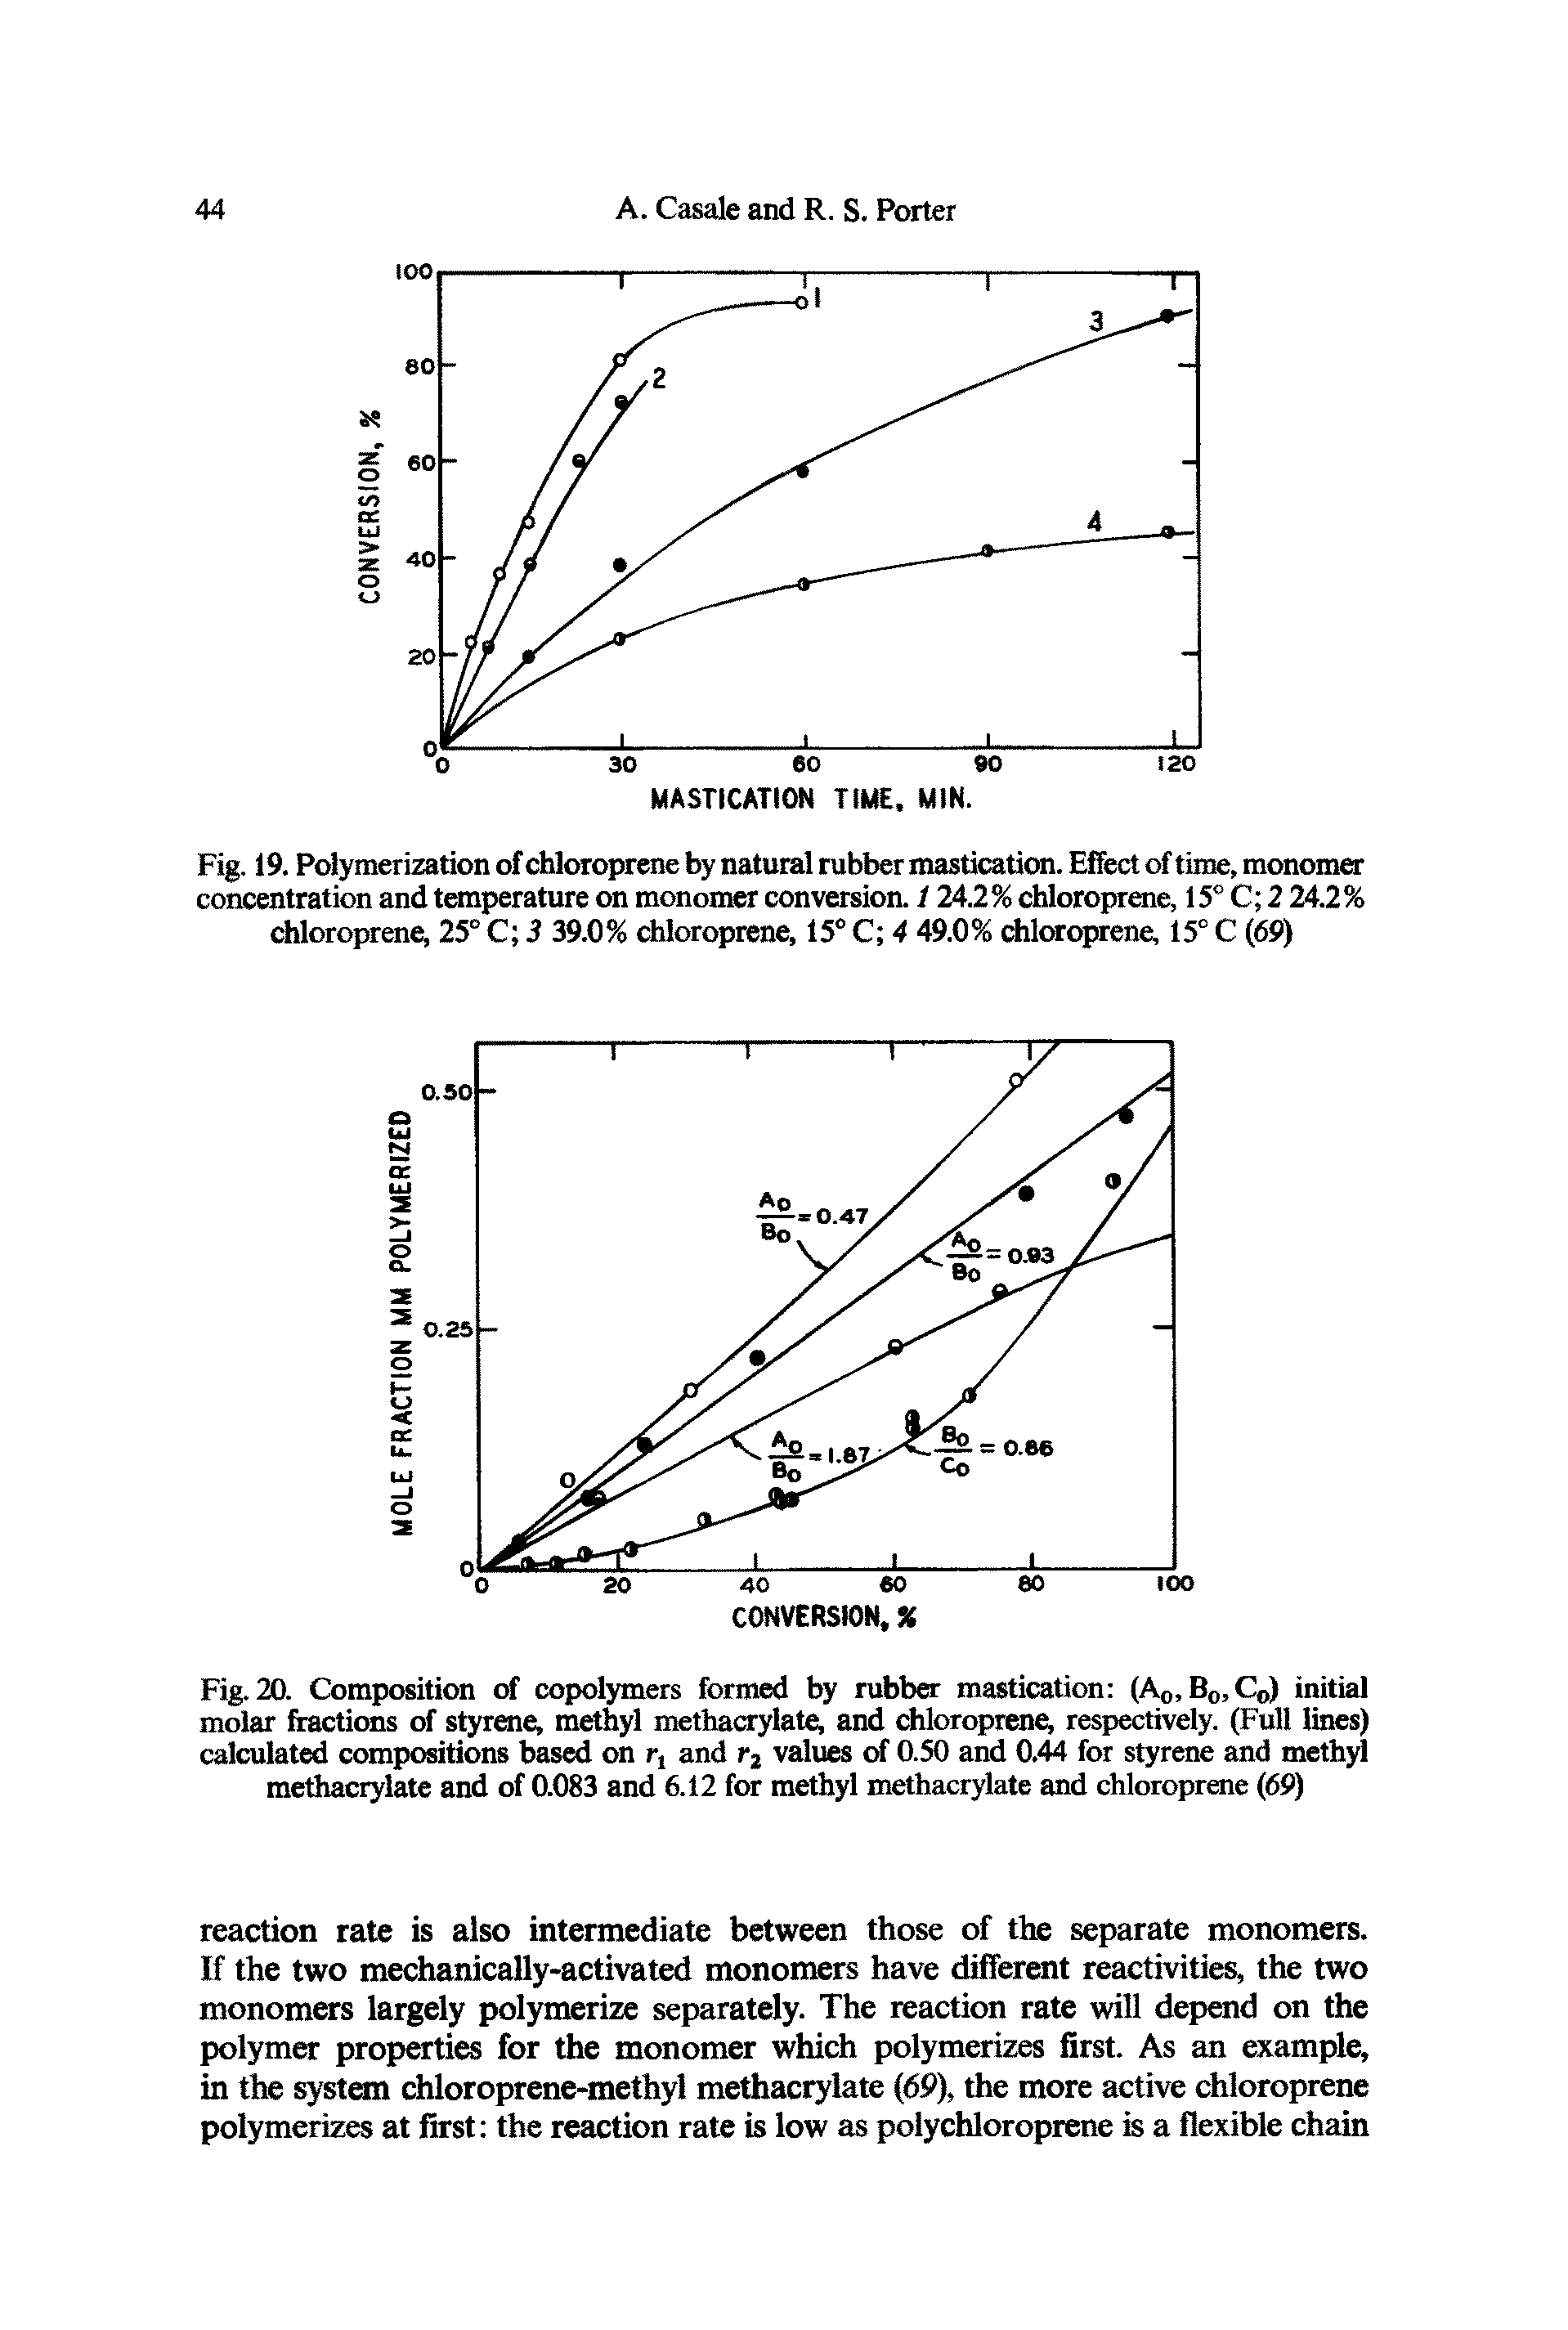 Fig. 19. Polymerization of chloroprene by natural rubber mastication. Effect of time, monomer concentration and temperature on monomer conversion. / 24.2% chloroprene, 15° C 2 24.2% chloroprene, 25°C 3 39.0% chloroprene, 15°C 4 49.0% chloroprene, 15° C (69)...